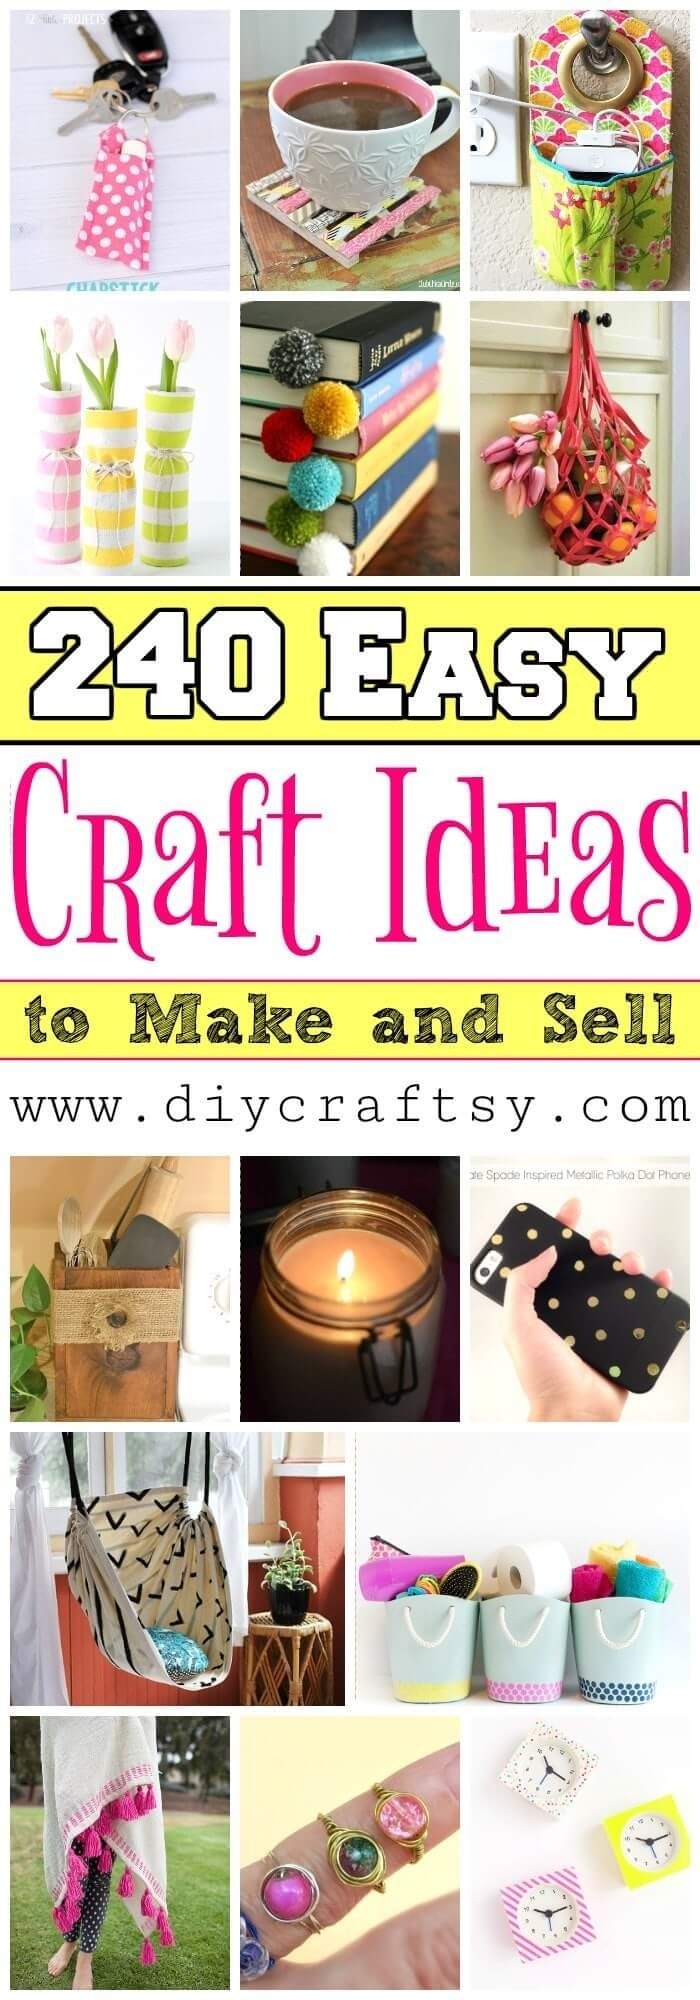 10 Most Popular Easy Craft Ideas To Sell 240 easy craft ideas to make and sell diy crafts 2022